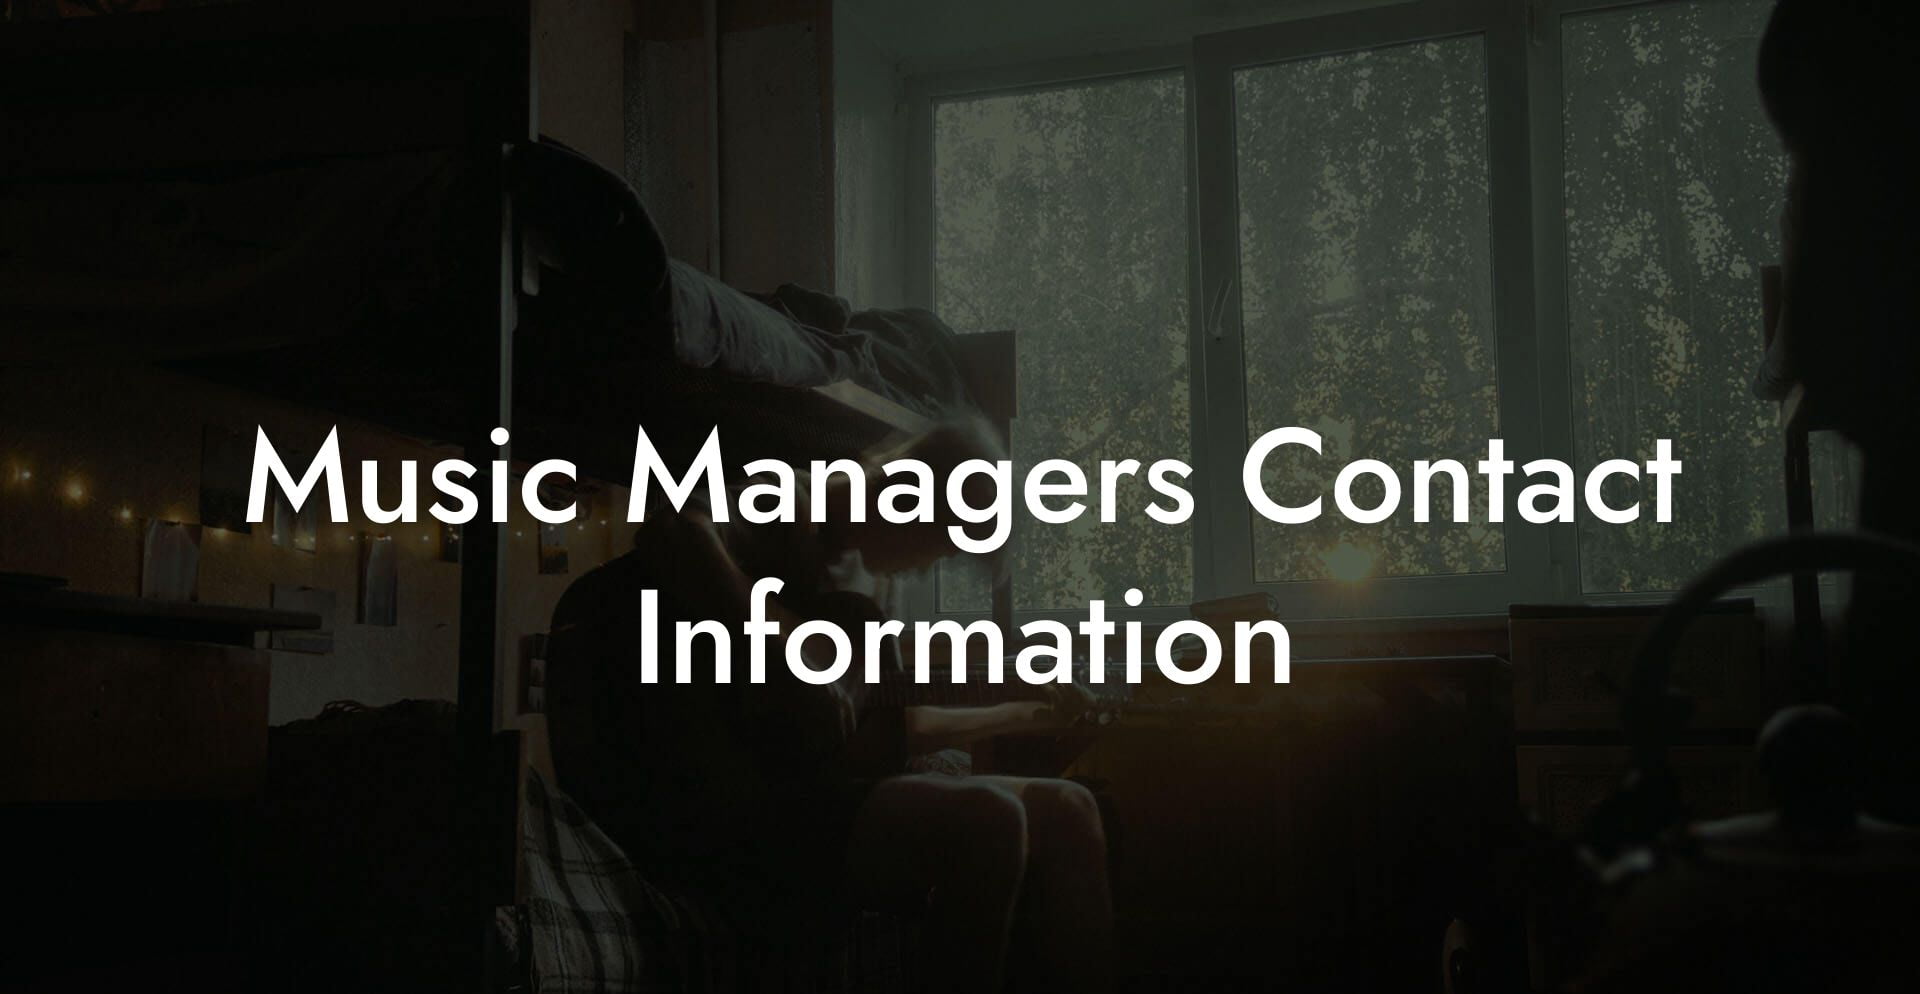 Music Managers Contact Information